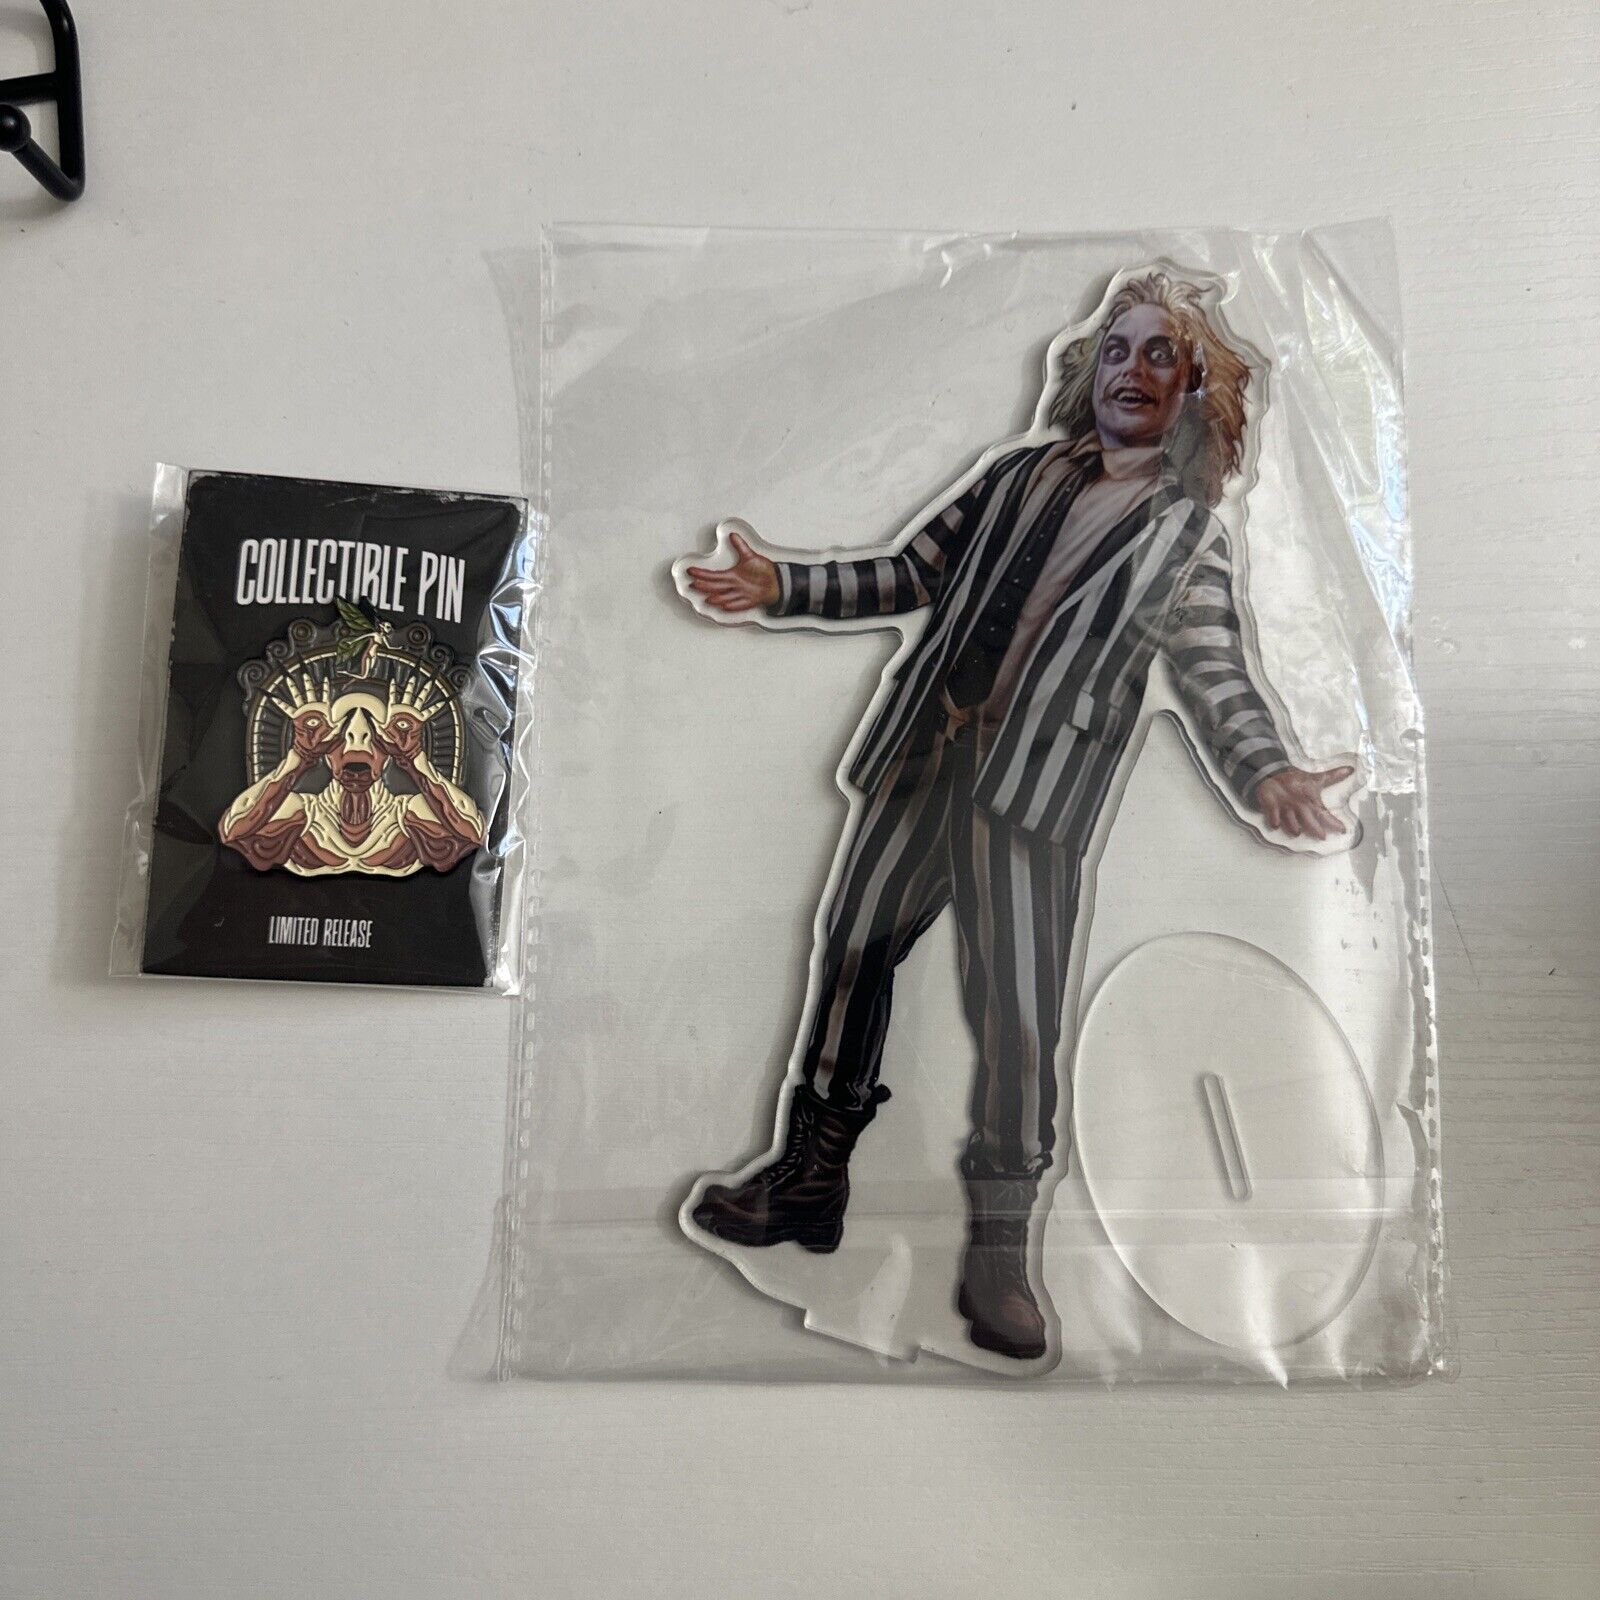 ZOBIE FRIGHT THE COLLECTOR ACRYLIC BeetleJucie And Pans Labyrinth Pin Exclusive